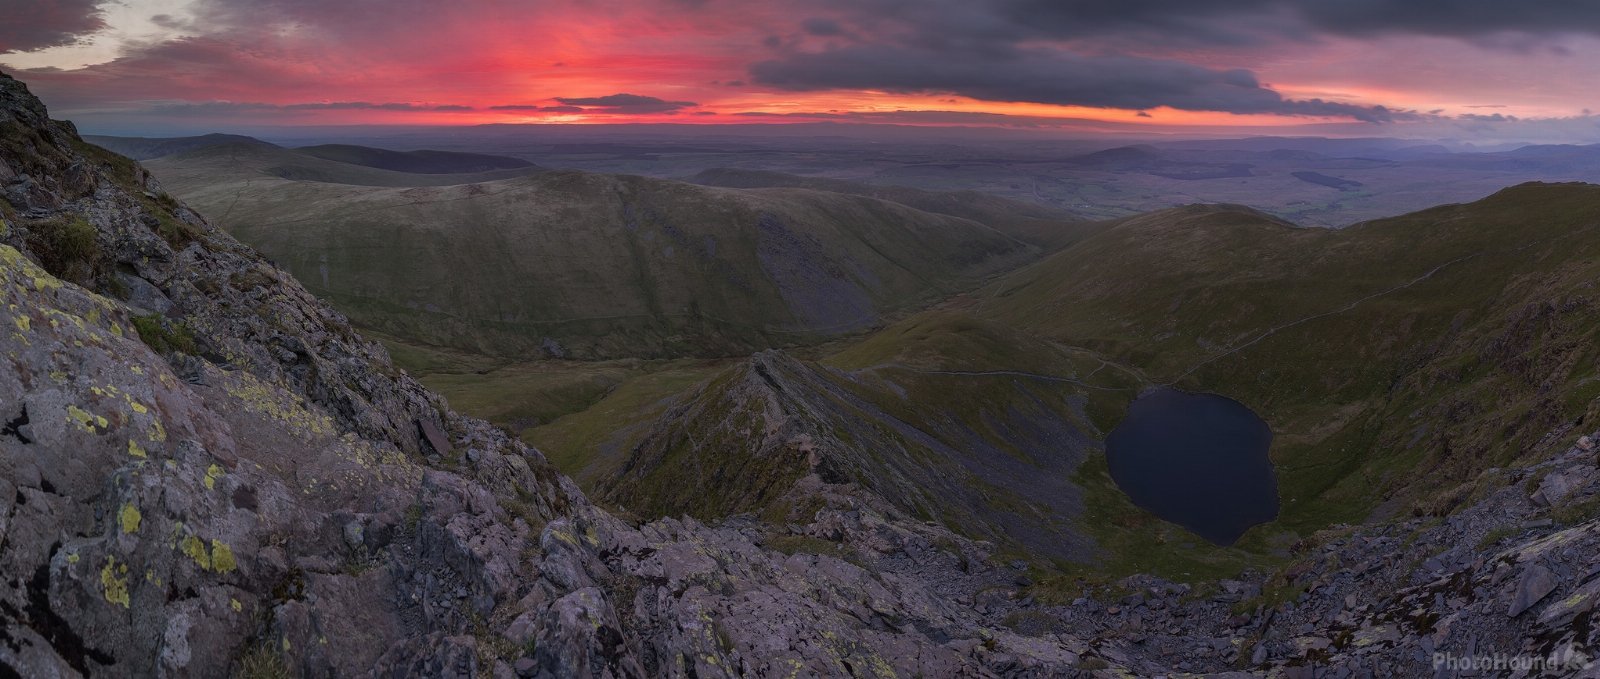 Image of Blencathra by James Grant